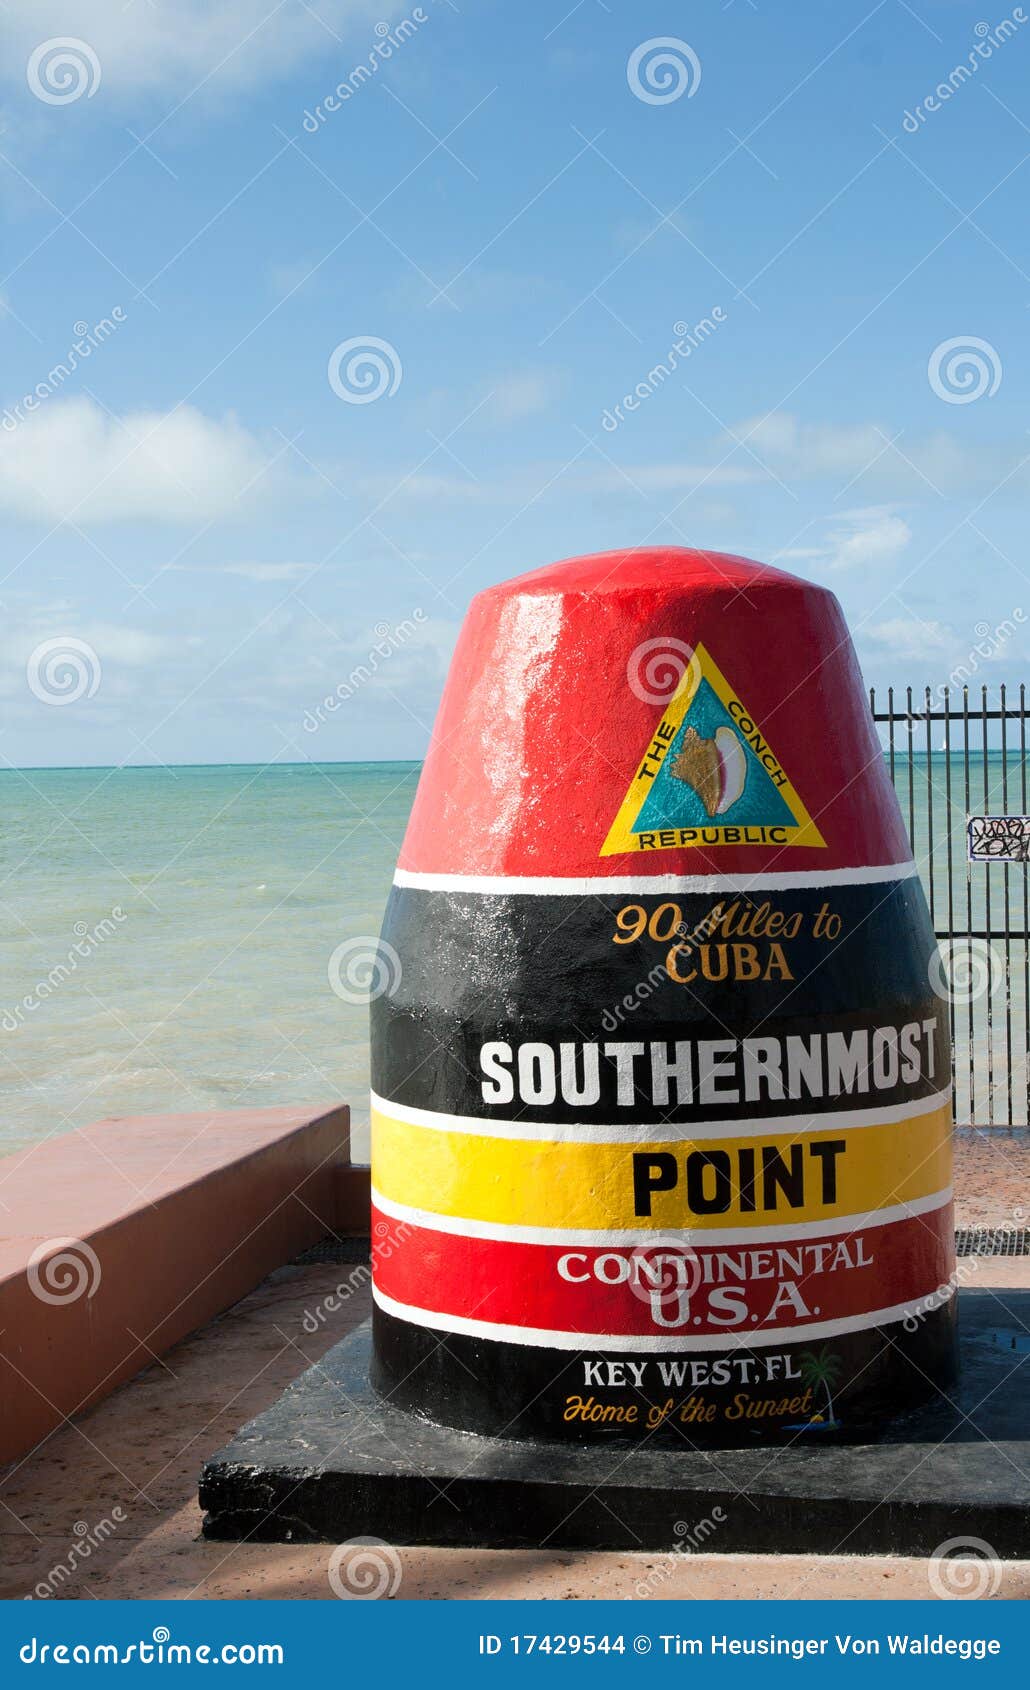 southernmost point, key west